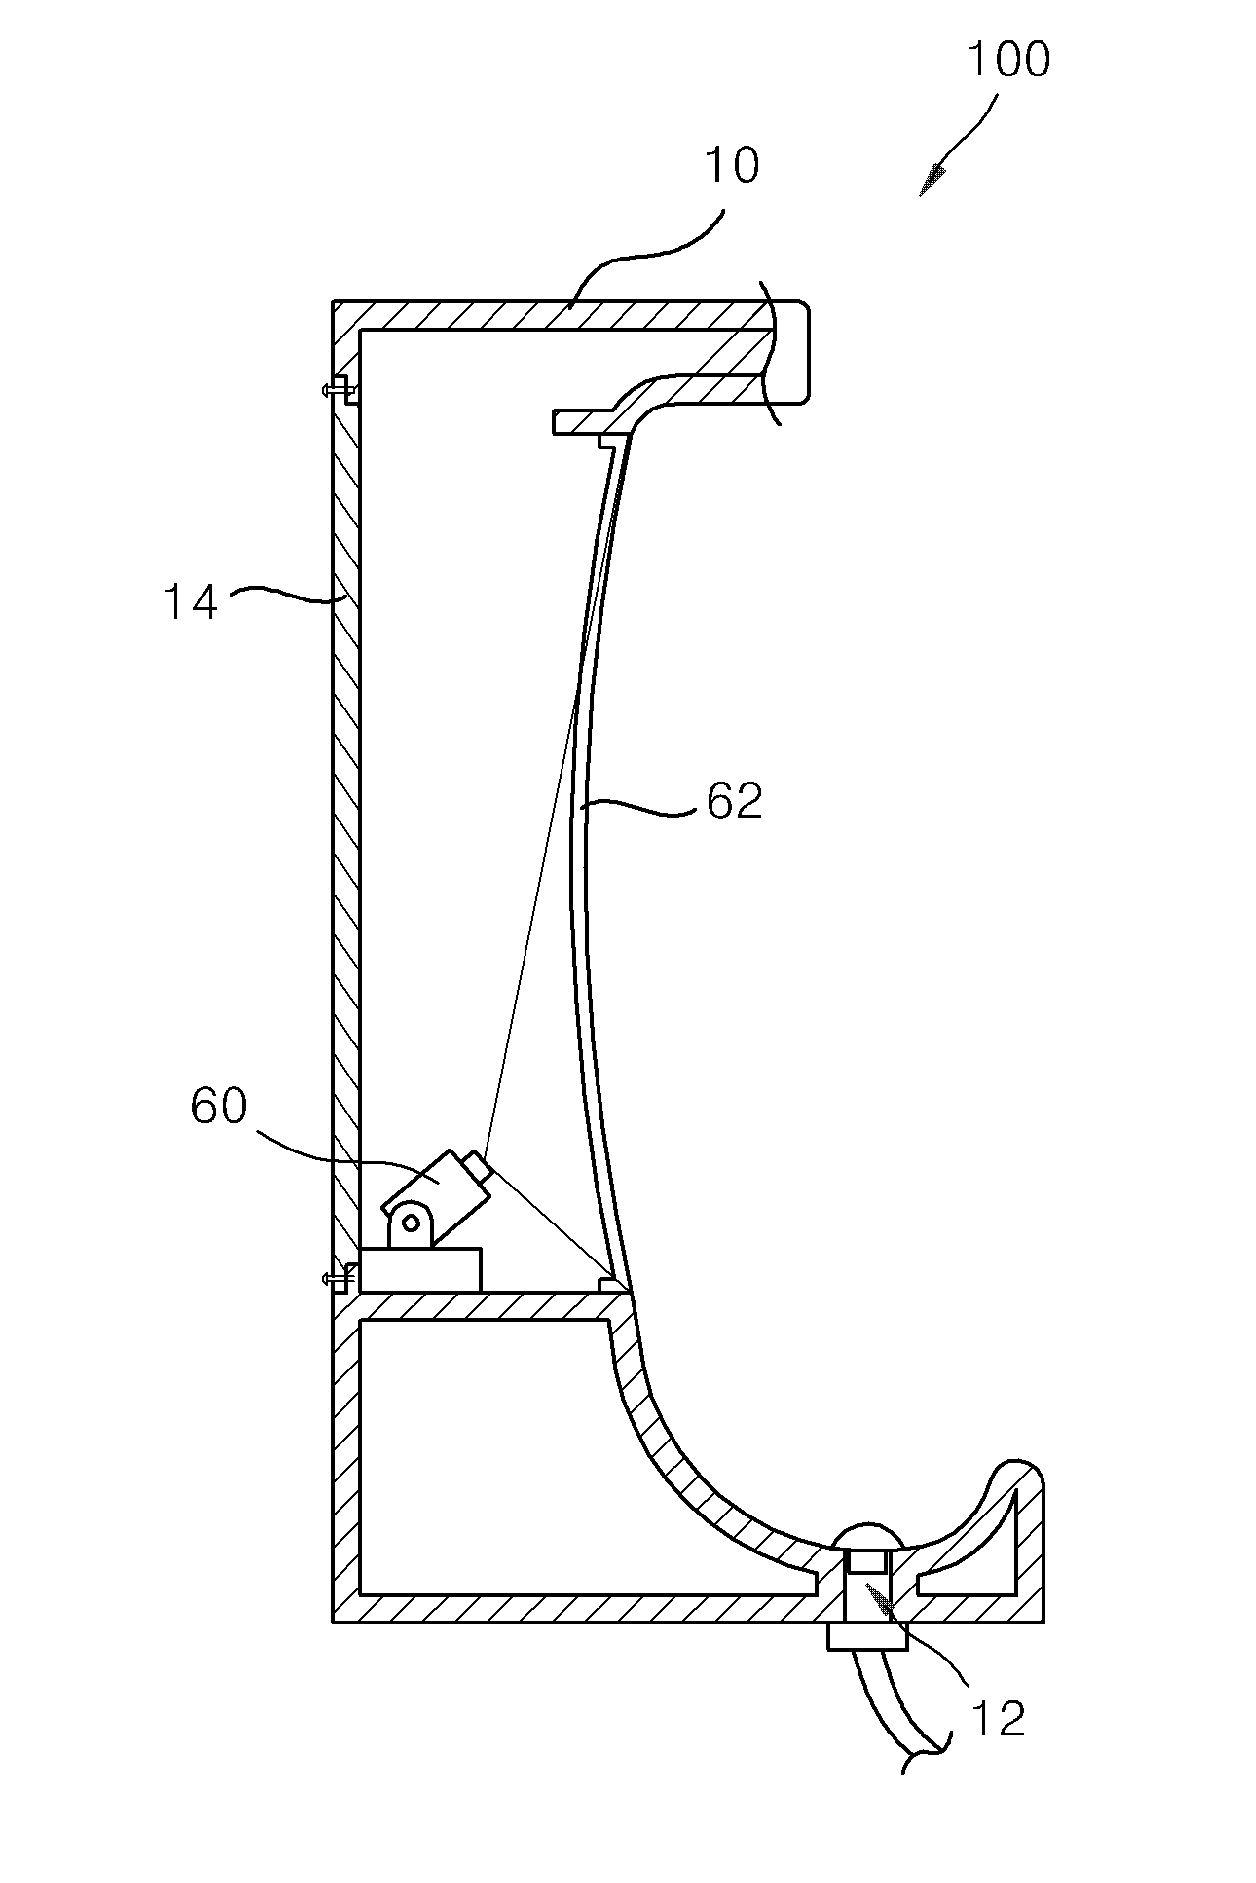 Urinal where imaging device is installed